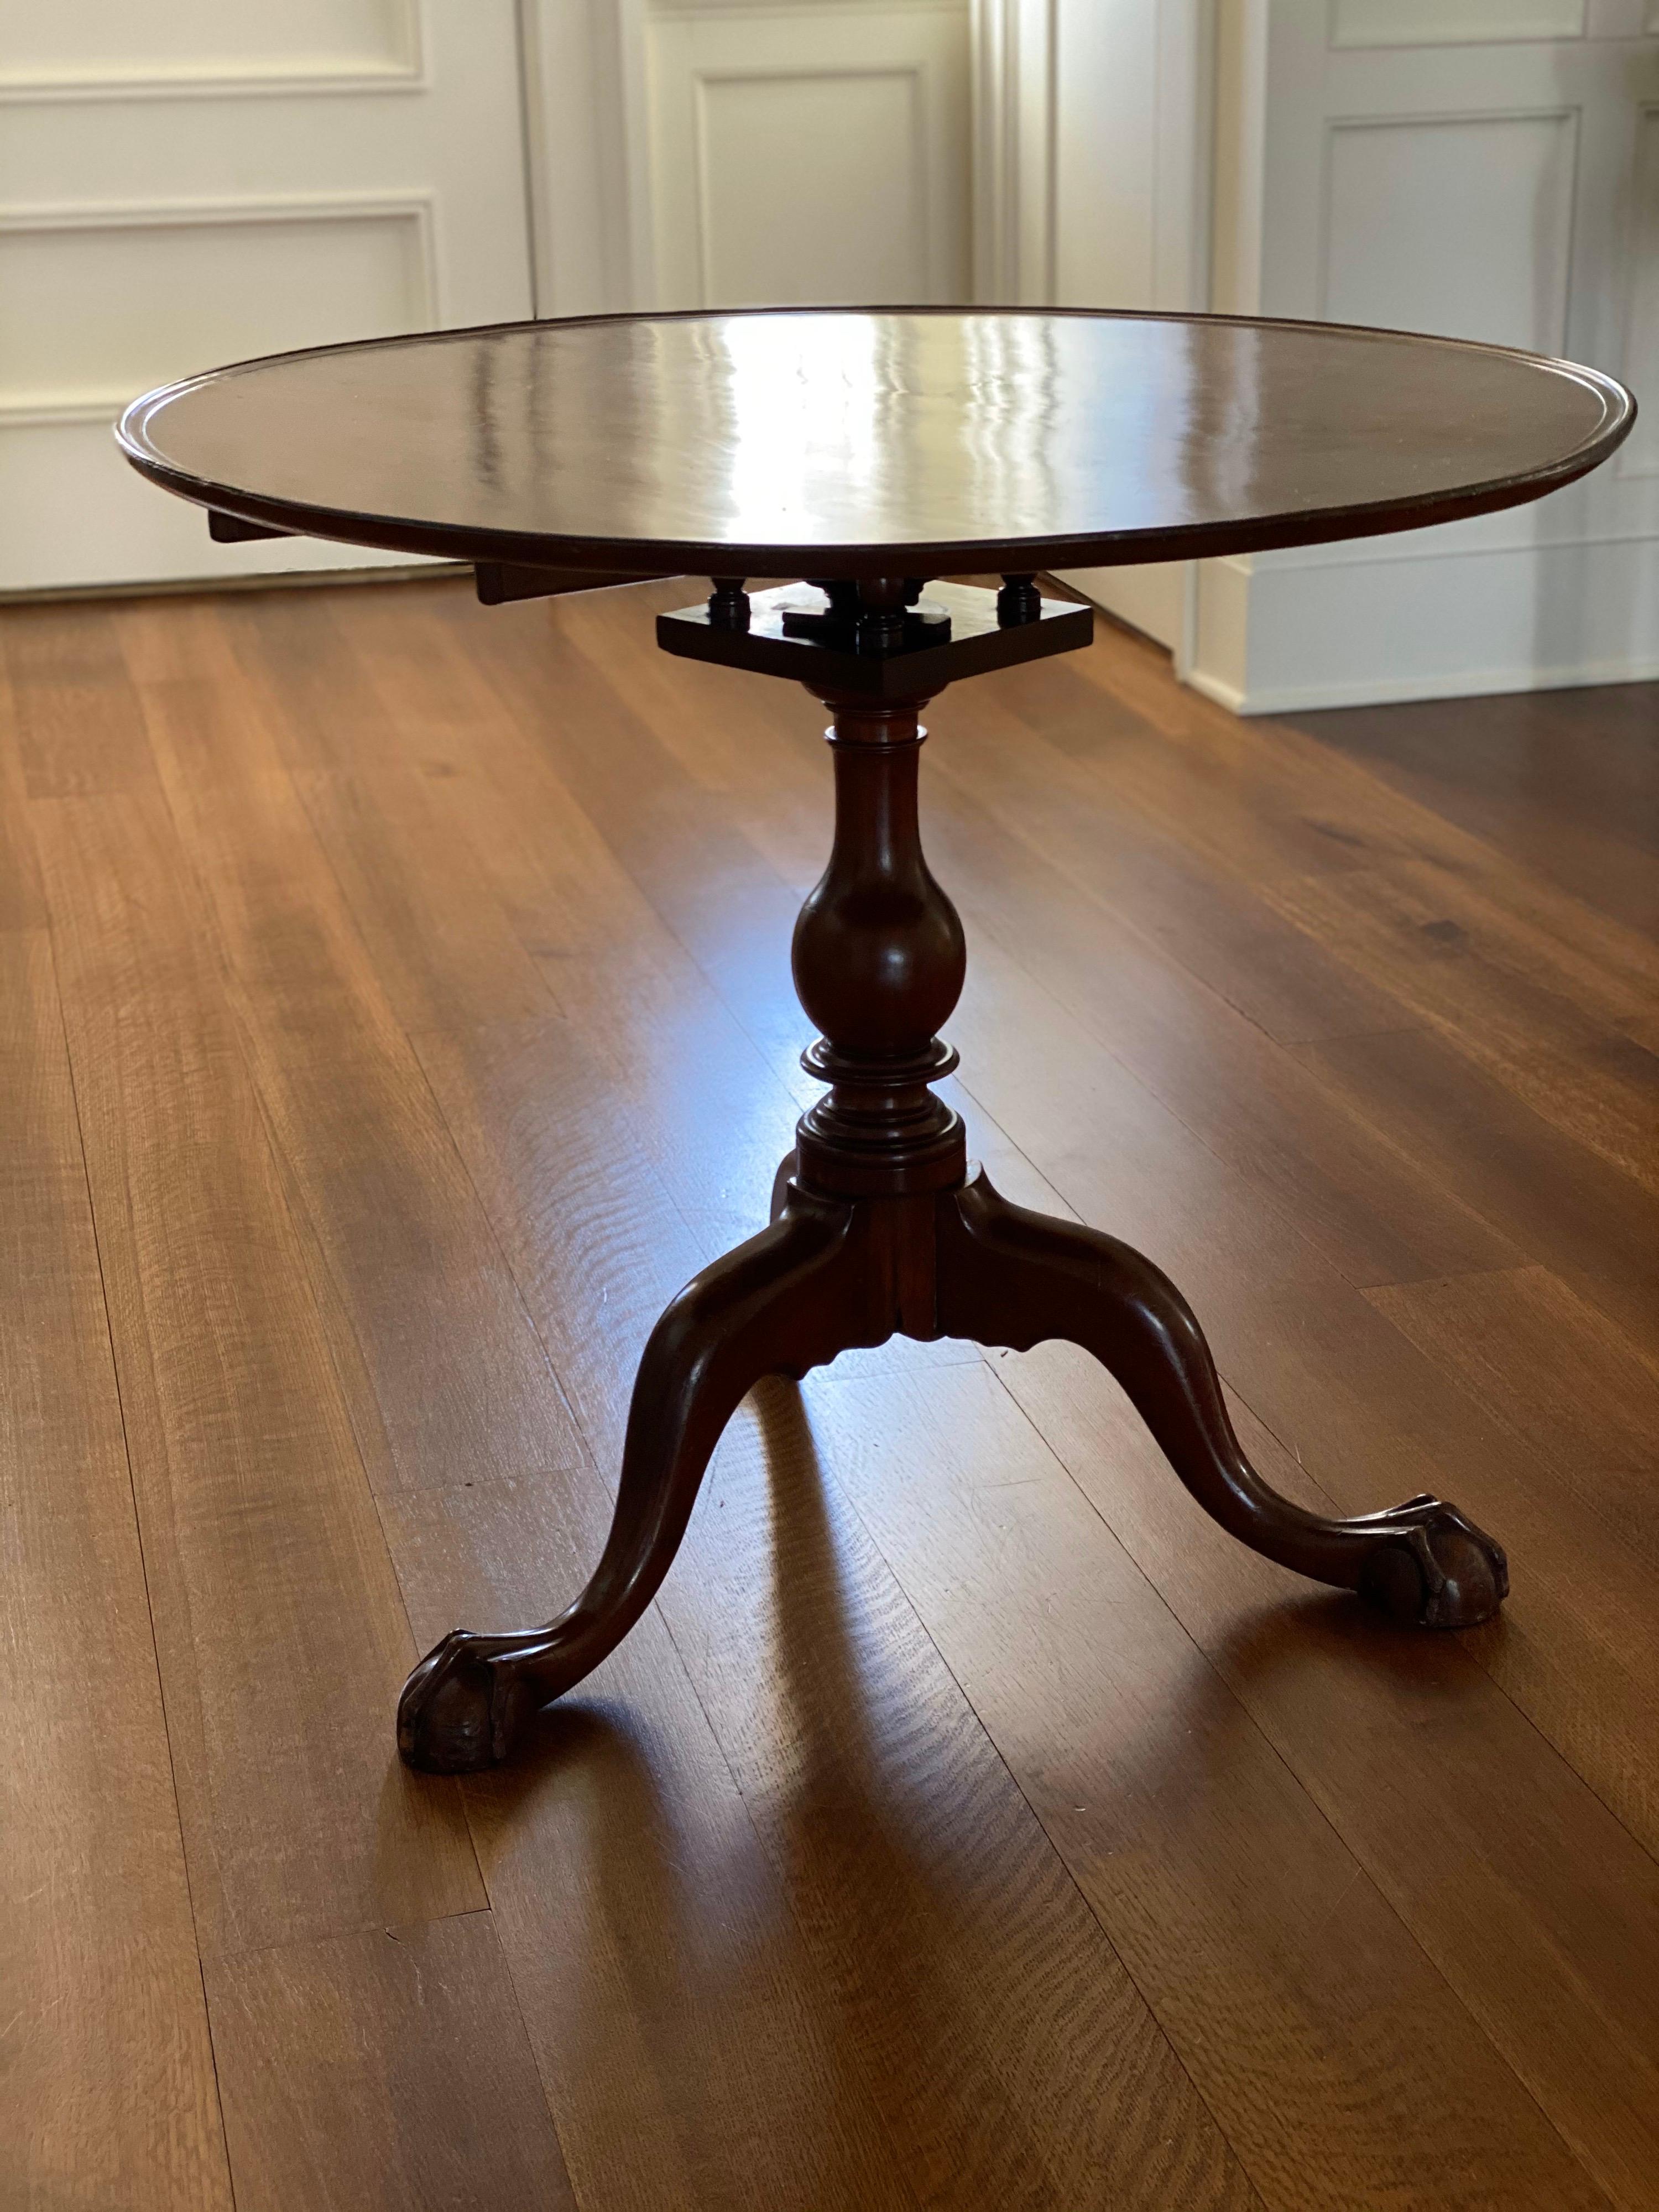 18th Century Chippendale Mahogany Dished Tilt-Top Tea Table, circa 1775 For Sale 1